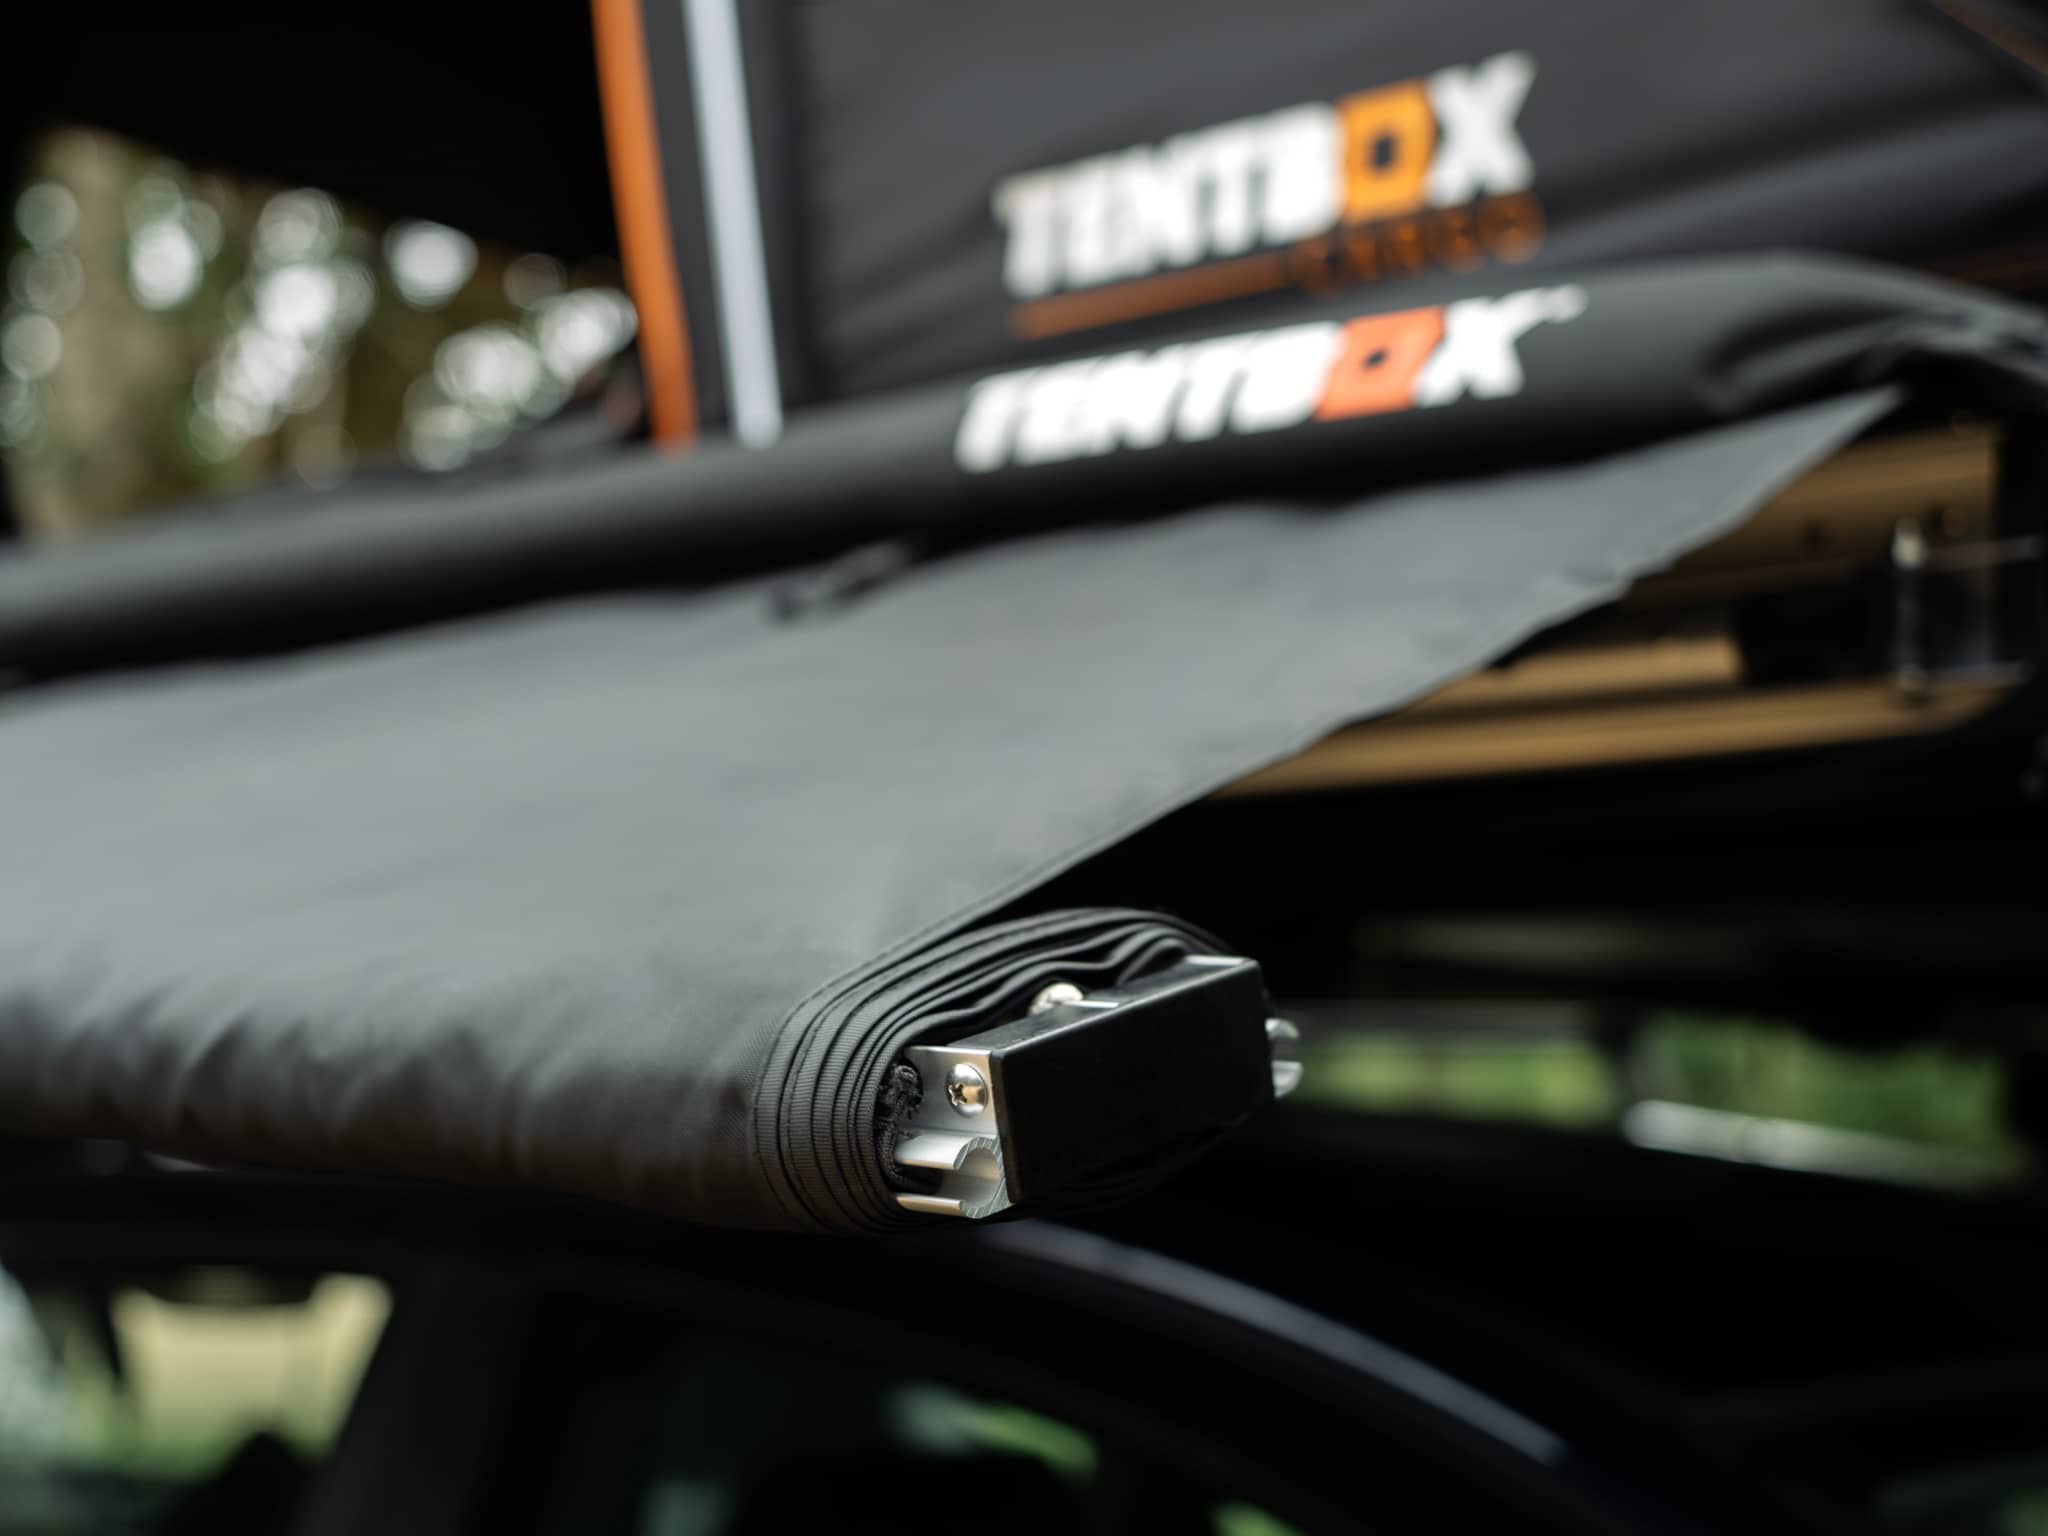 TentBox Universal Side Awning - Awning for the car